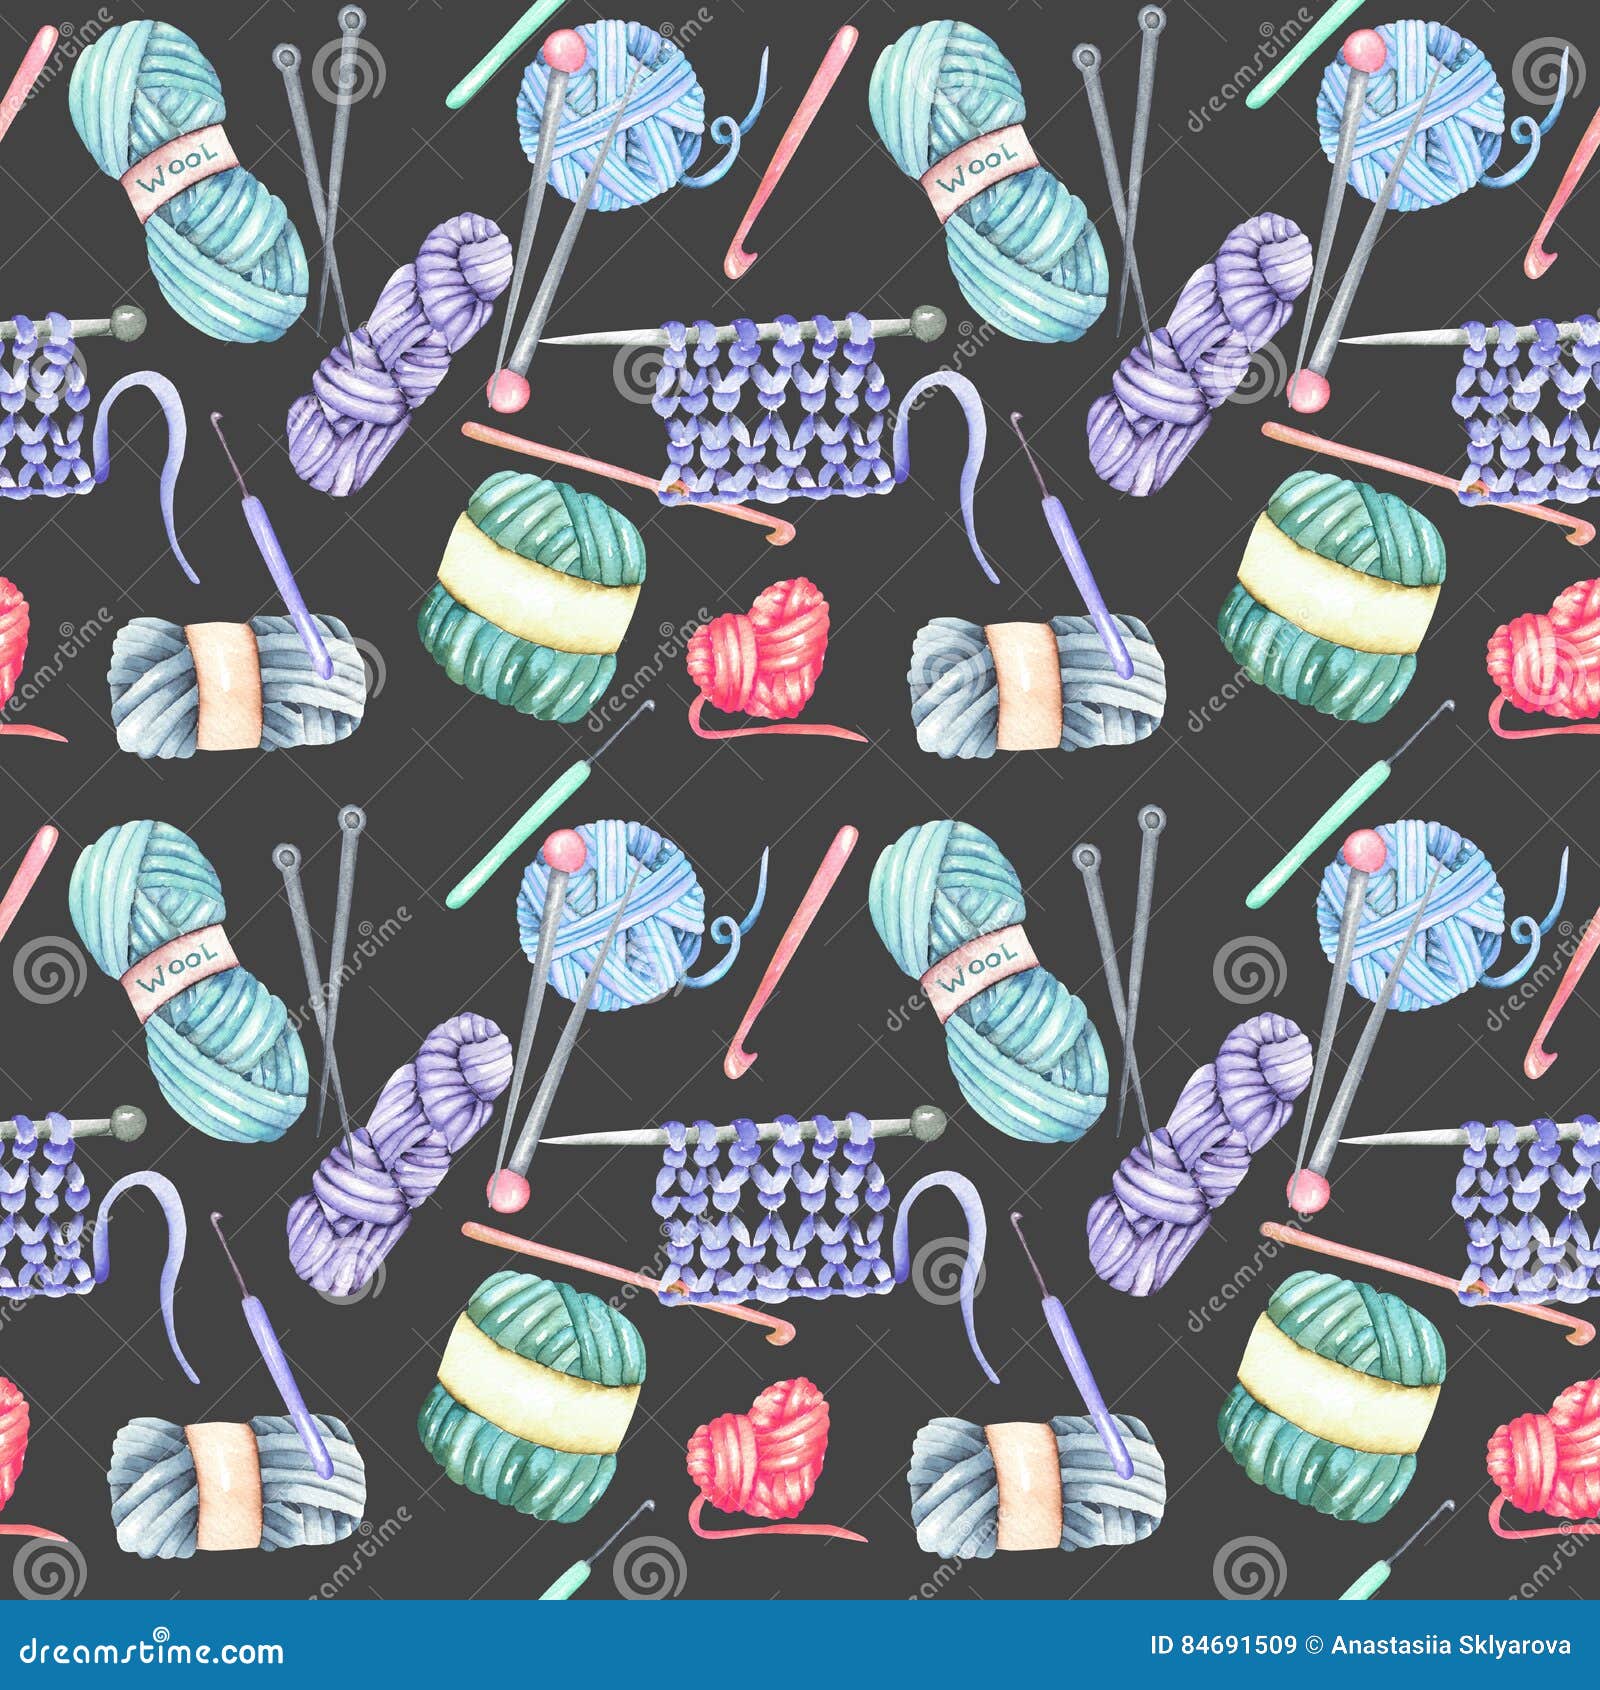 Seamless Pattern With Watercolor Knitting Elements Yarn